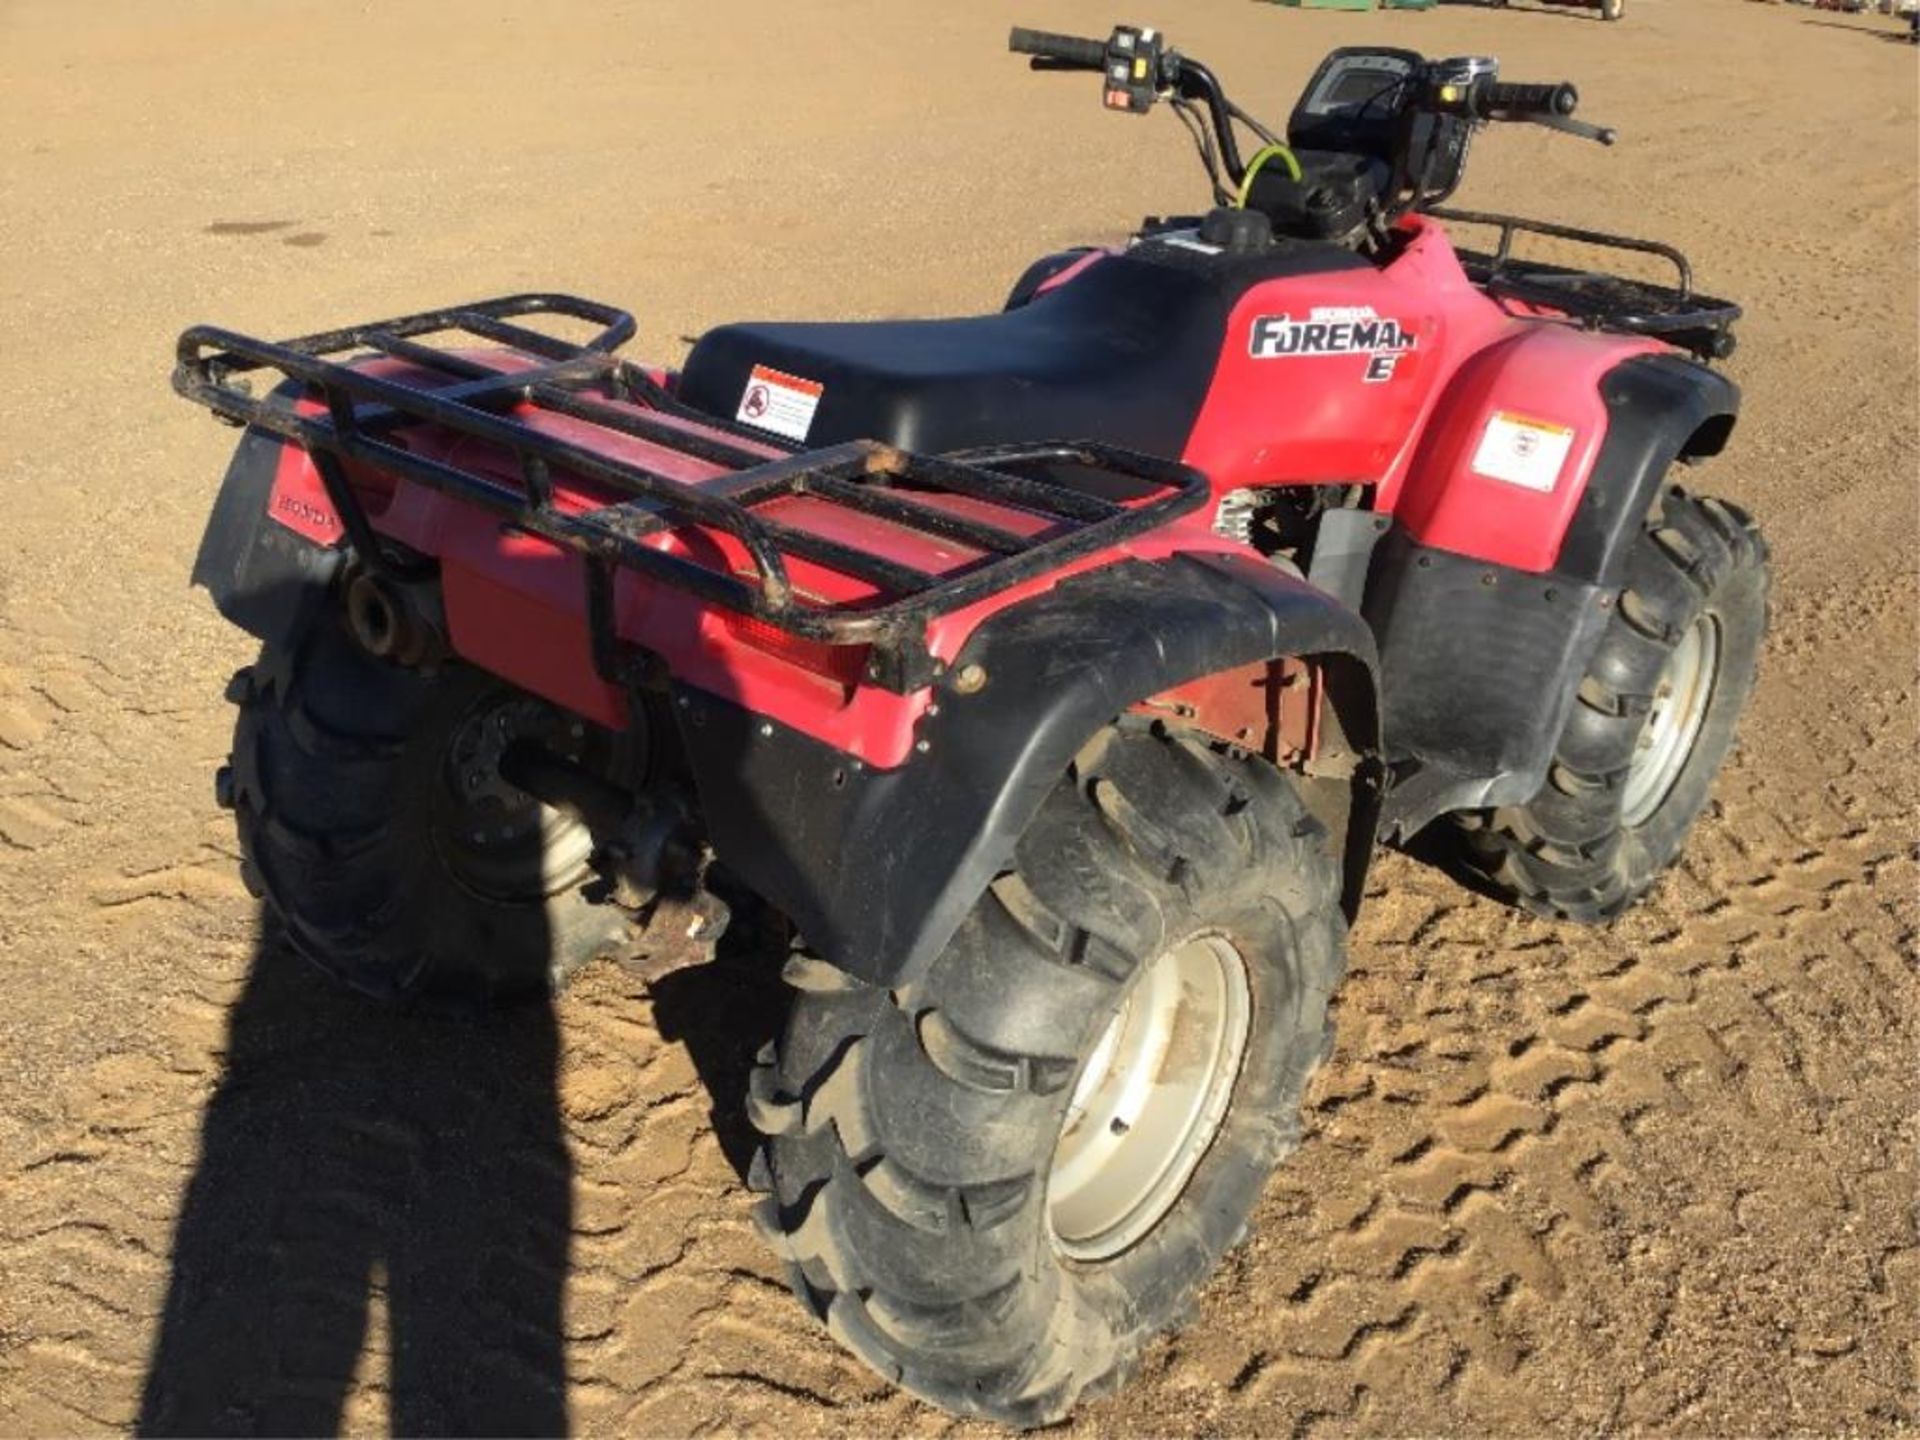 2002 Honda 450 Foreman ES Quad Winch, 7630km (VIN Not Available) - Image 6 of 7